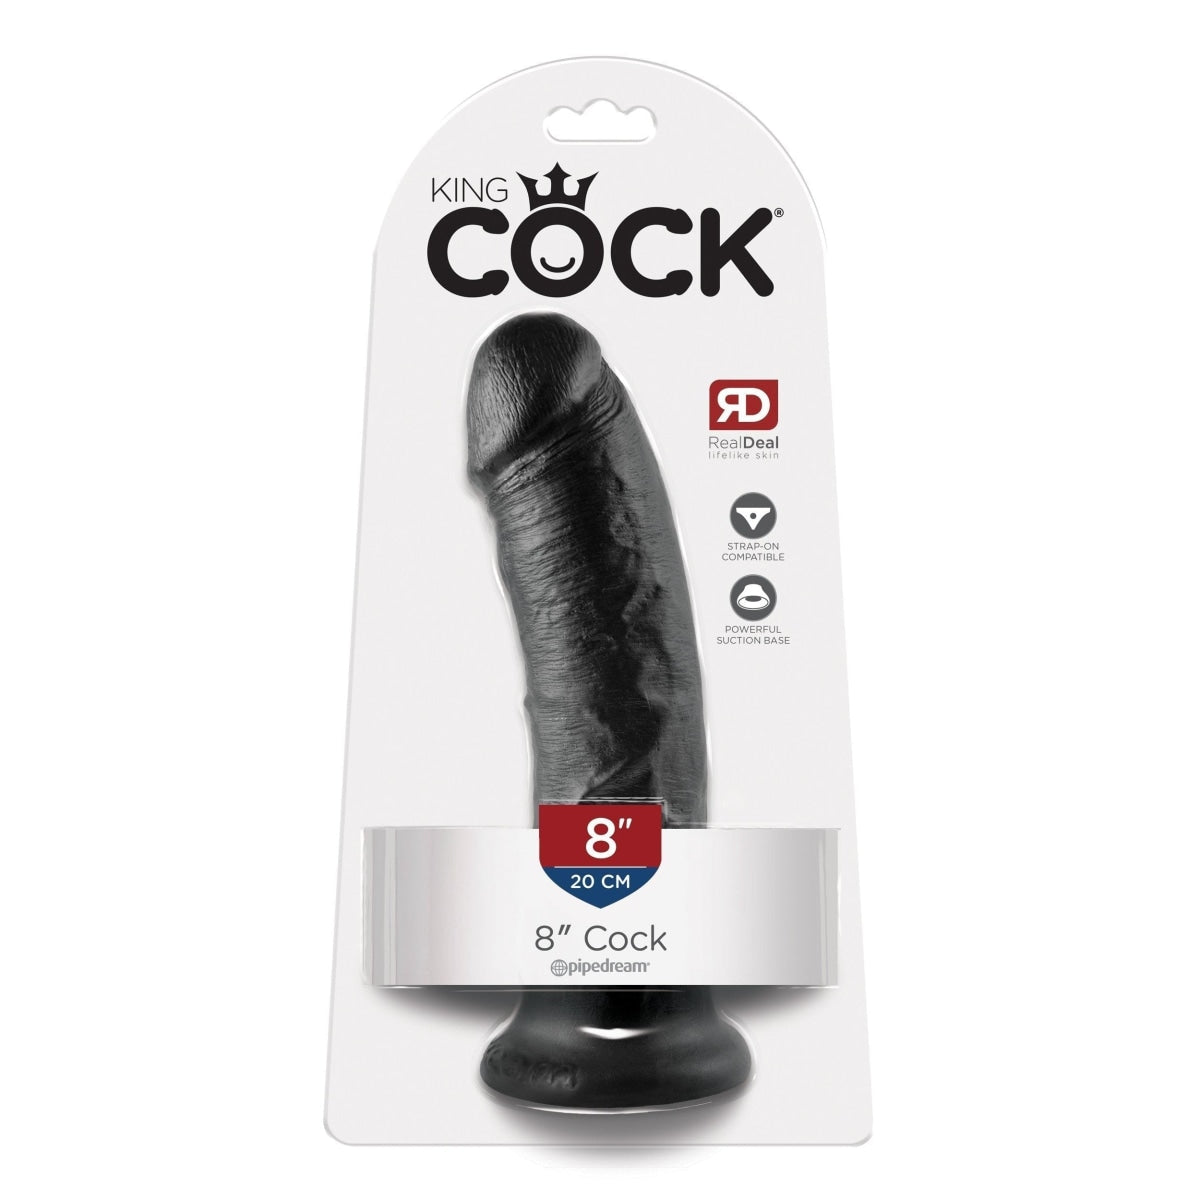 King Cock 8 In Cock Black Intimates Adult Boutique